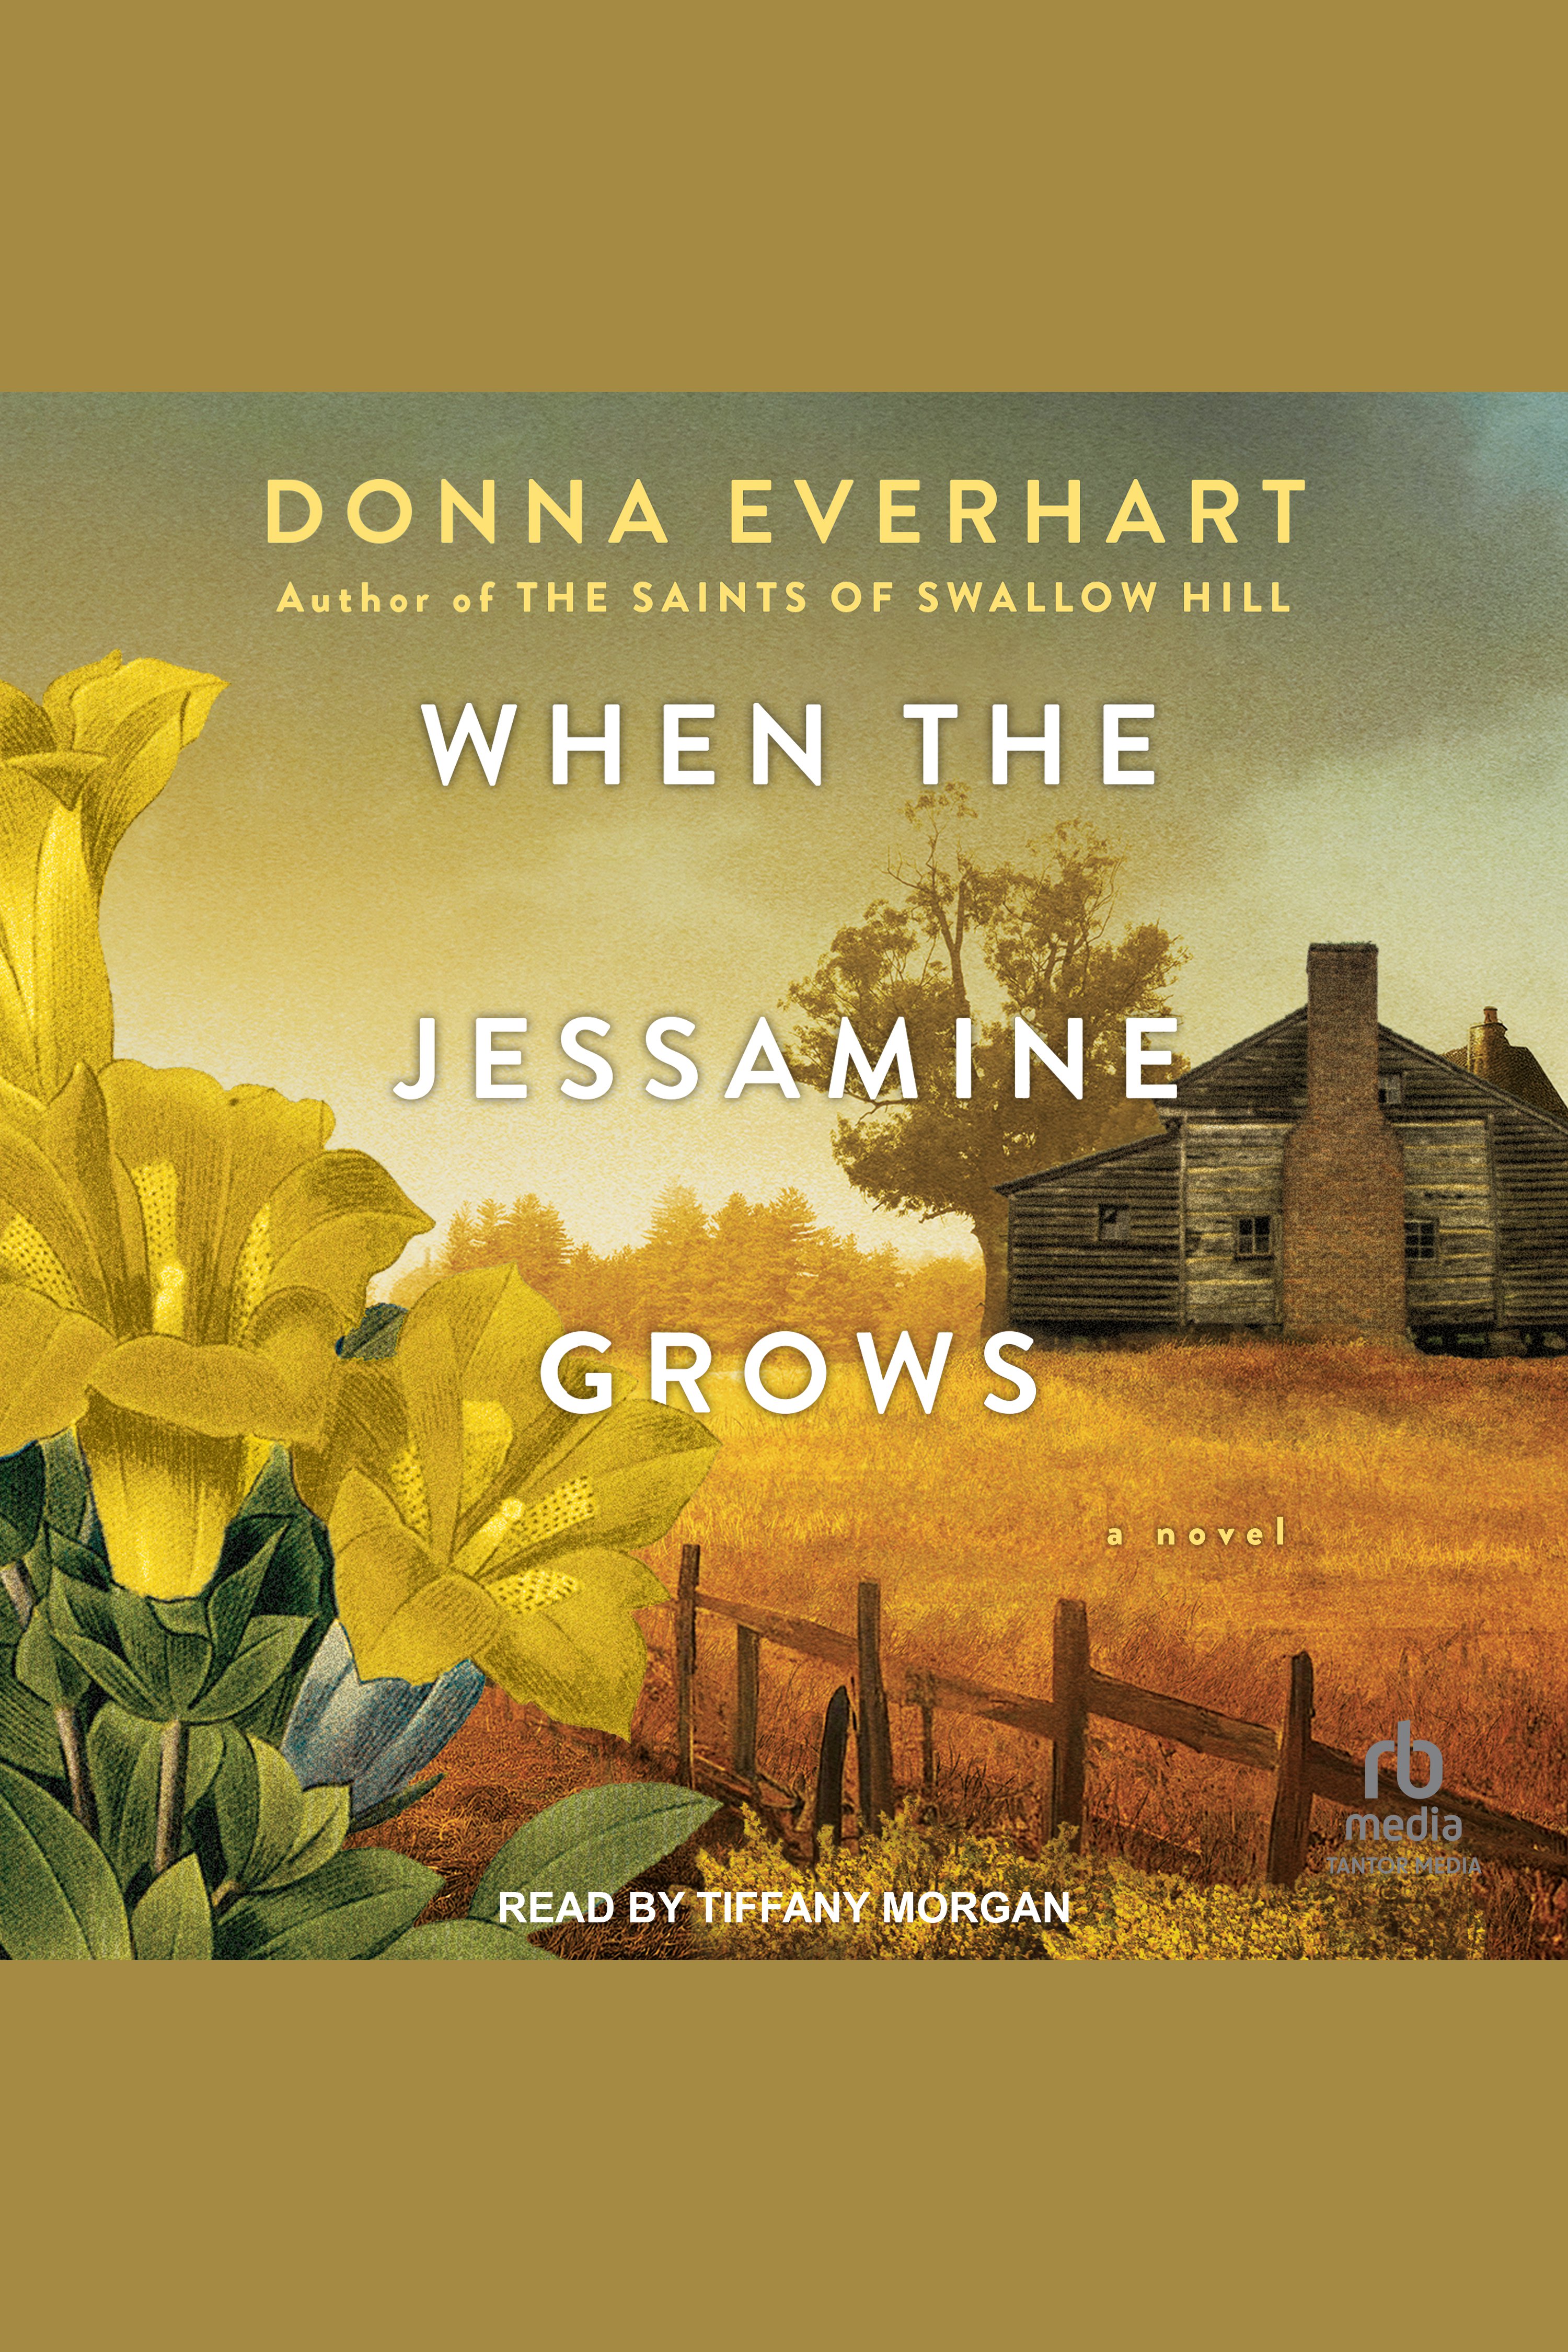 Cover image for When the Jessamine Grows [electronic resource] :